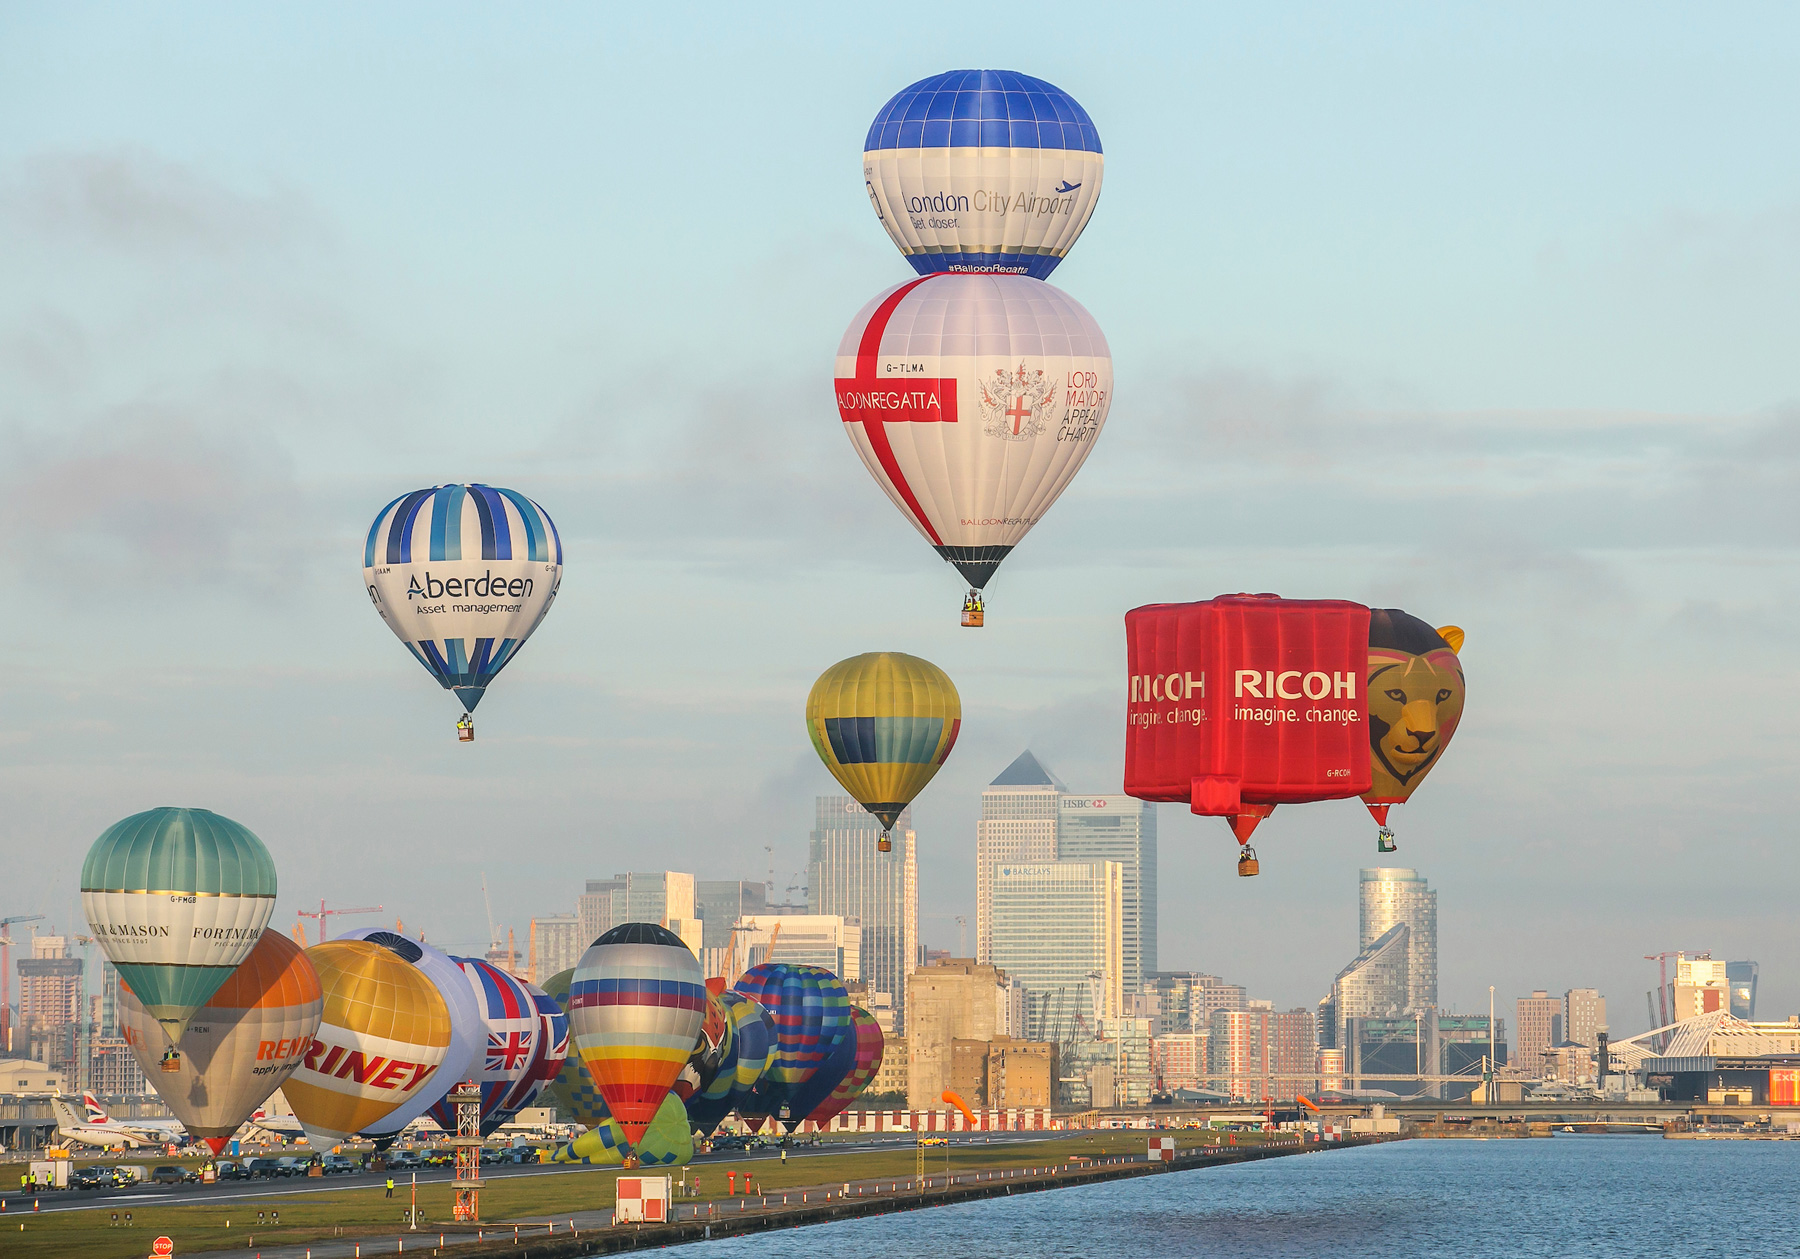 Look out for hot air balloons flying over Central London